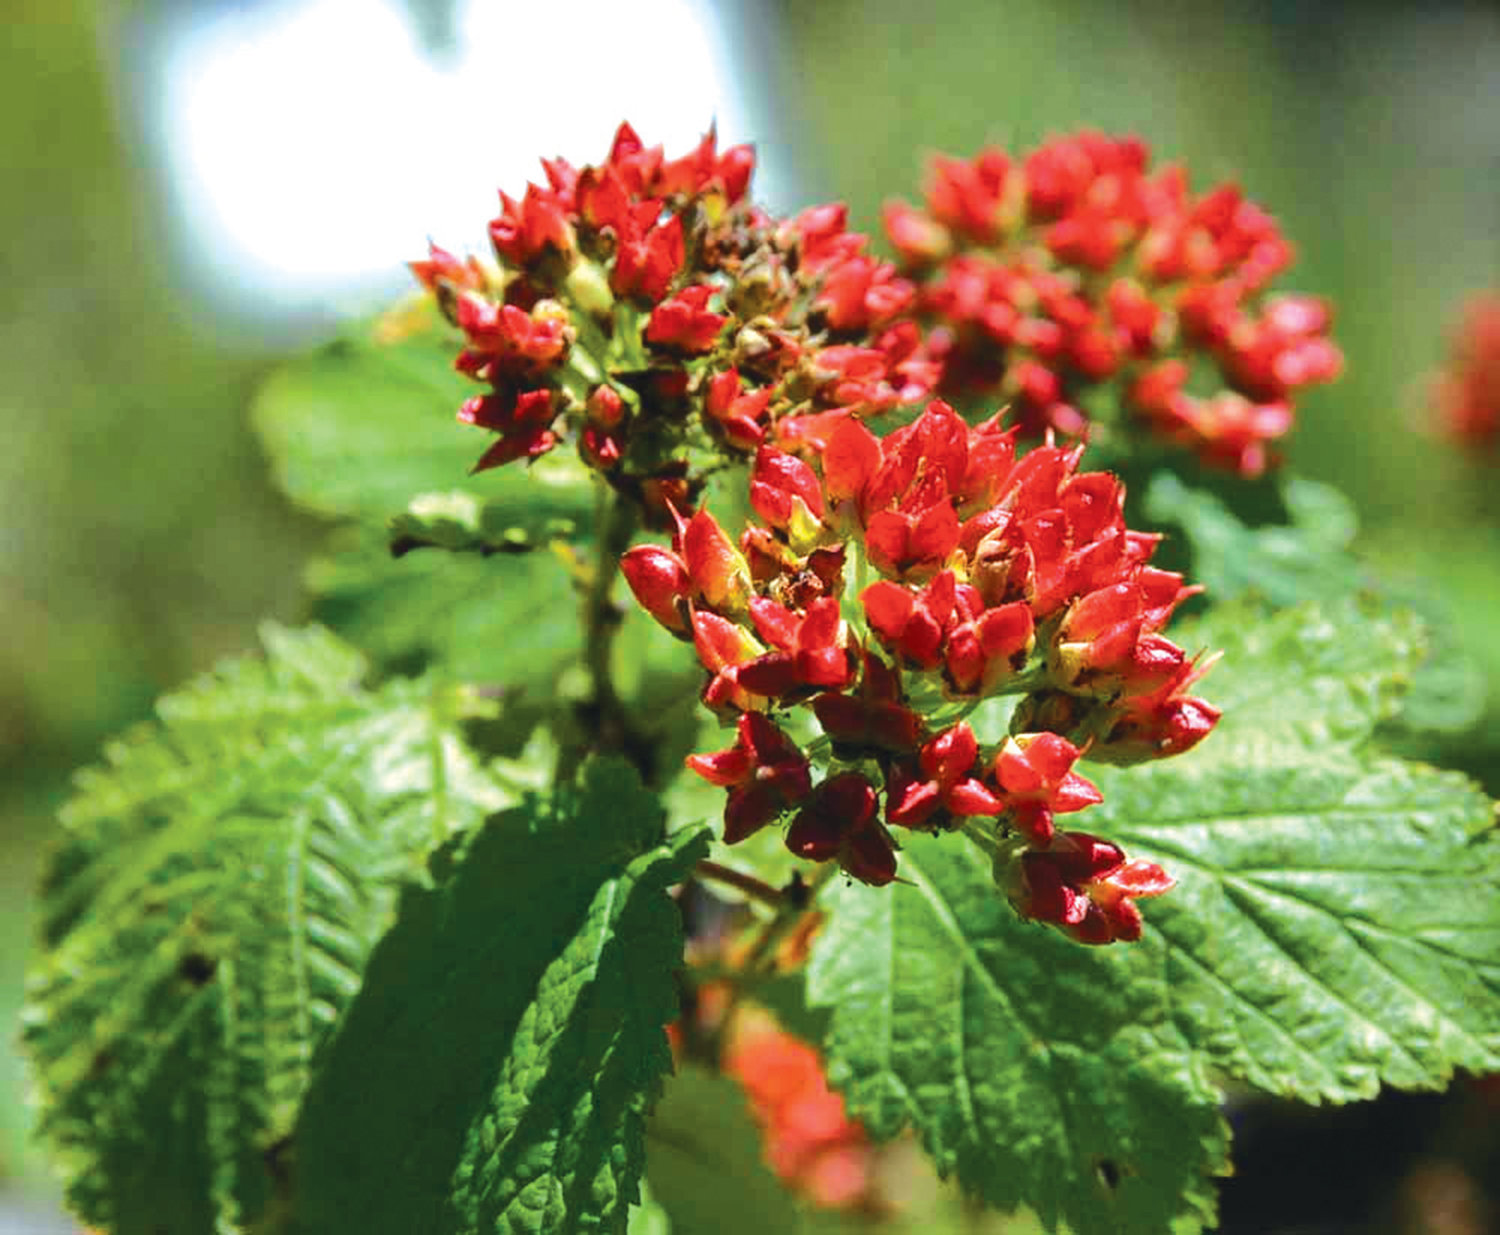 Pacific Ninebark (Physocarpus capitatus) is available for sale at this year’s Native Plant Sale. Orders can be made ahead of time at the Conservation District’s website, jeffersoncd.org. A large deciduous shrub that can grow to 15 feet tall, this plant prefers moist soil. Its dense matting root system makes it useful in stream-side stabilization and its peeling layers of cinnamon colored bark provides attractive winter interest.